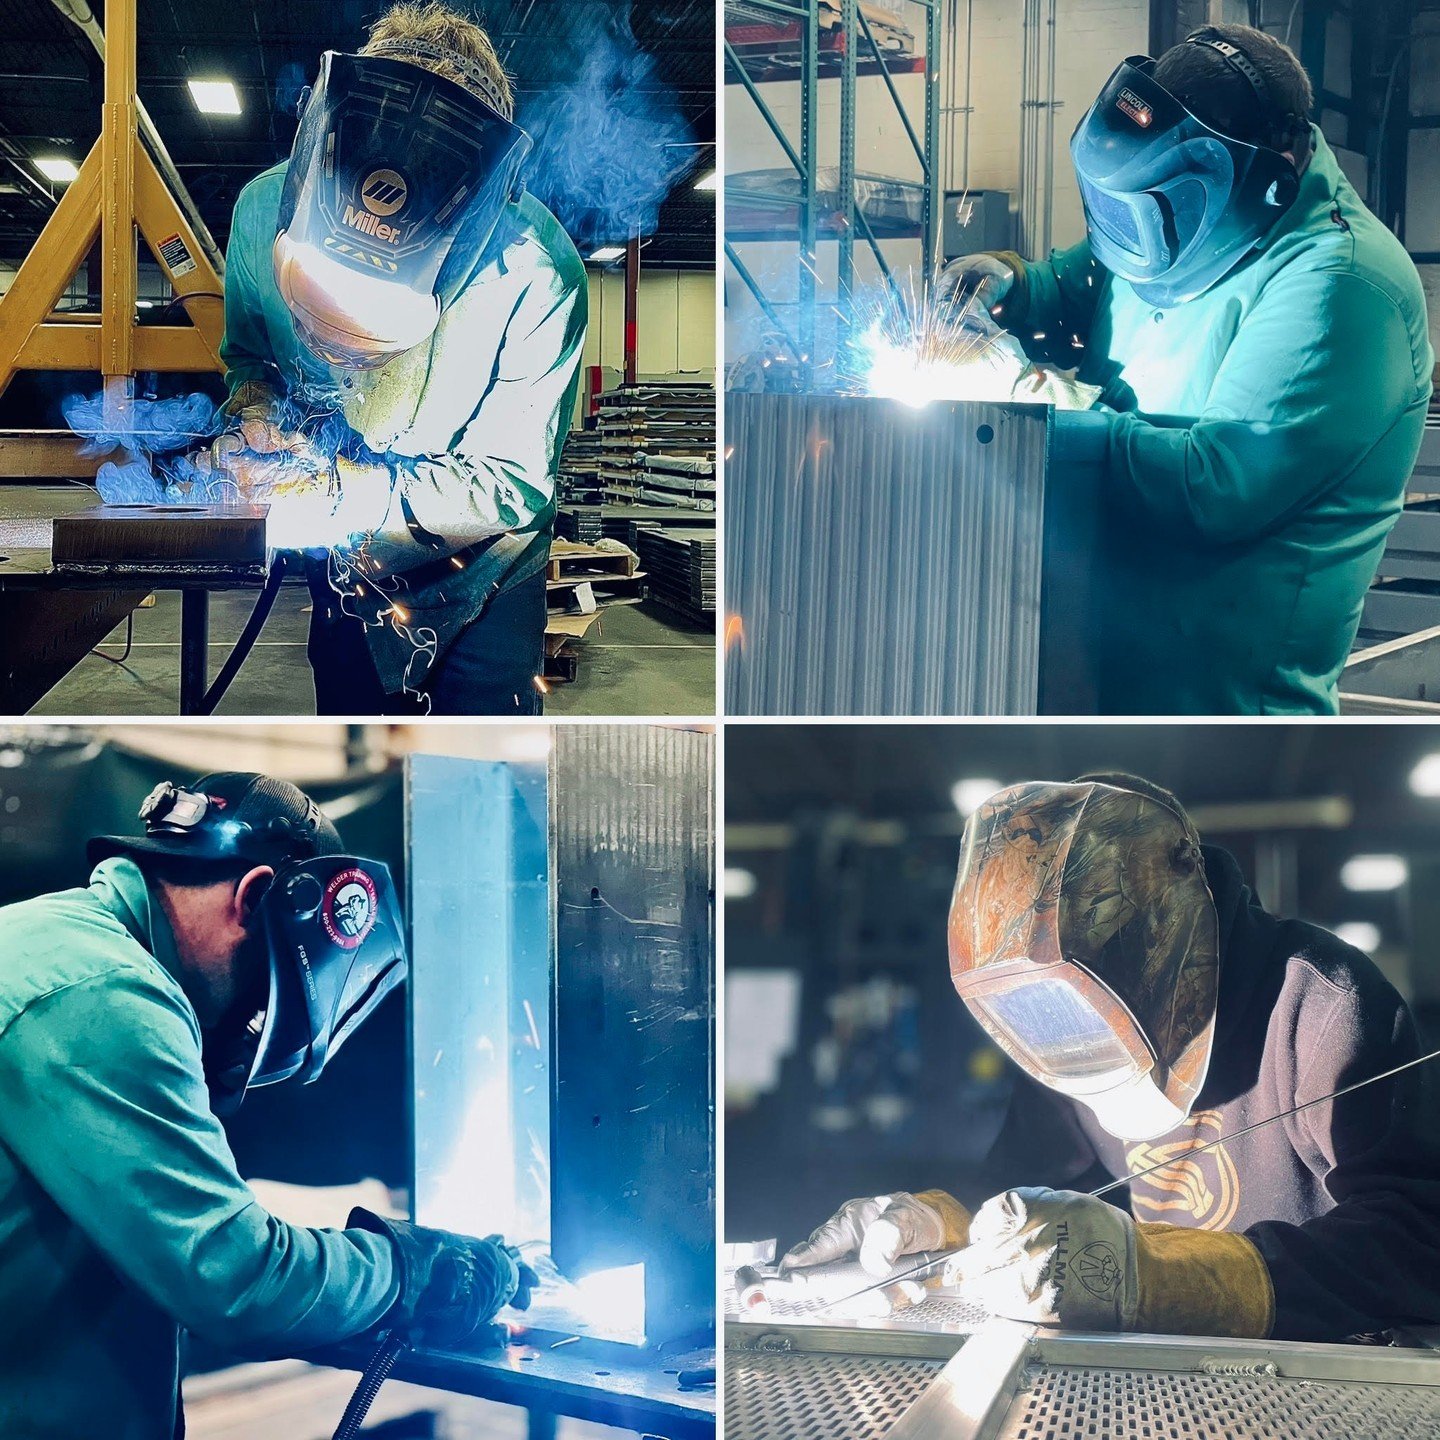 In honor of National Welding Month, we celebrate all the welders who work tirelessly to build, repair, and innovate! May your sparks fly, your welds be strong, and your passion for your craft continue to inspire us all.